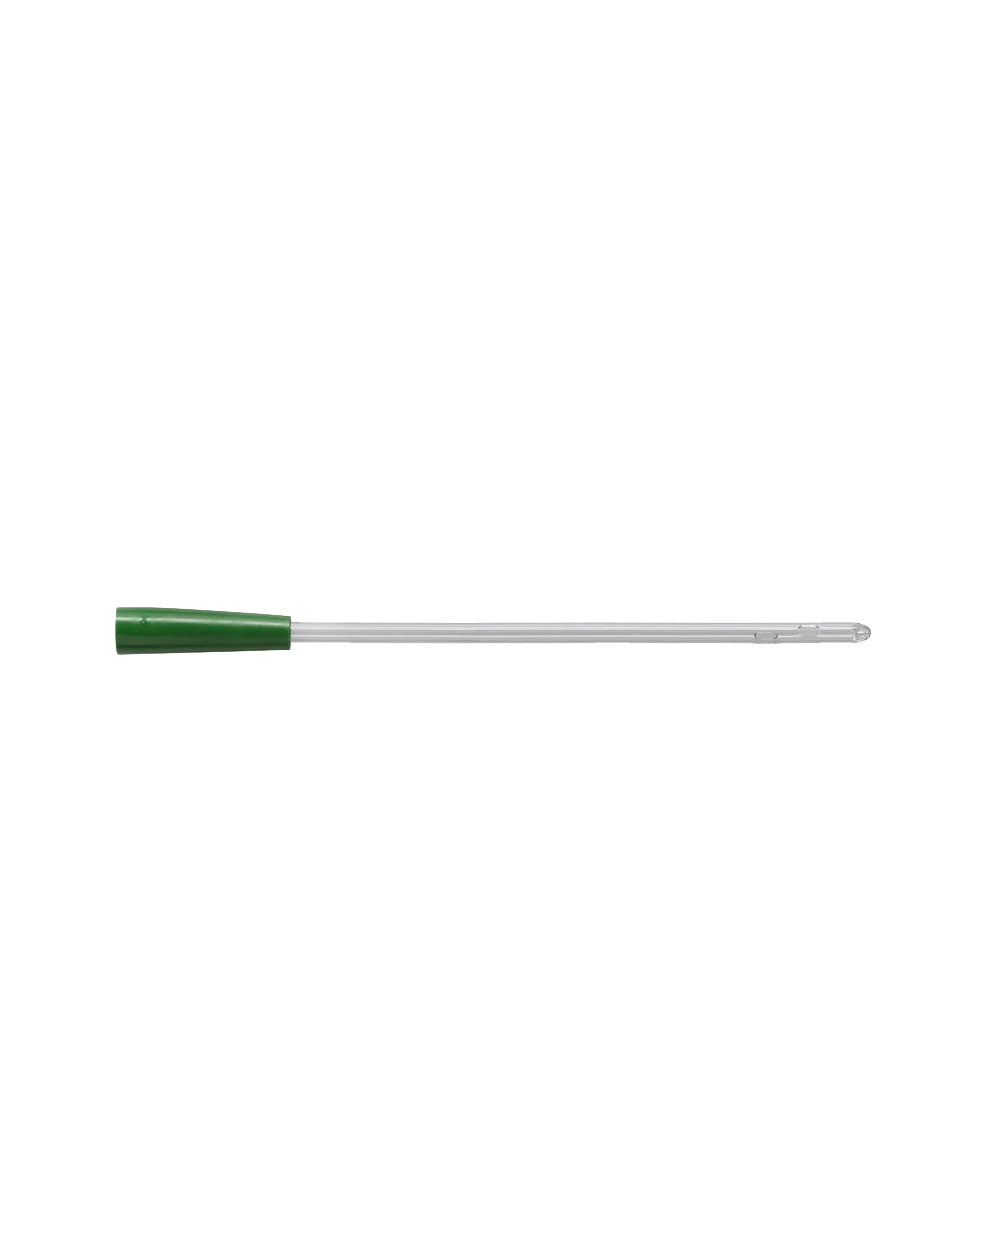 Coloplast Self-Cath Urethral Catheter Male Coude Olive with Guide Stripe 818  18FR 16" (40cm) - 30 Per Box